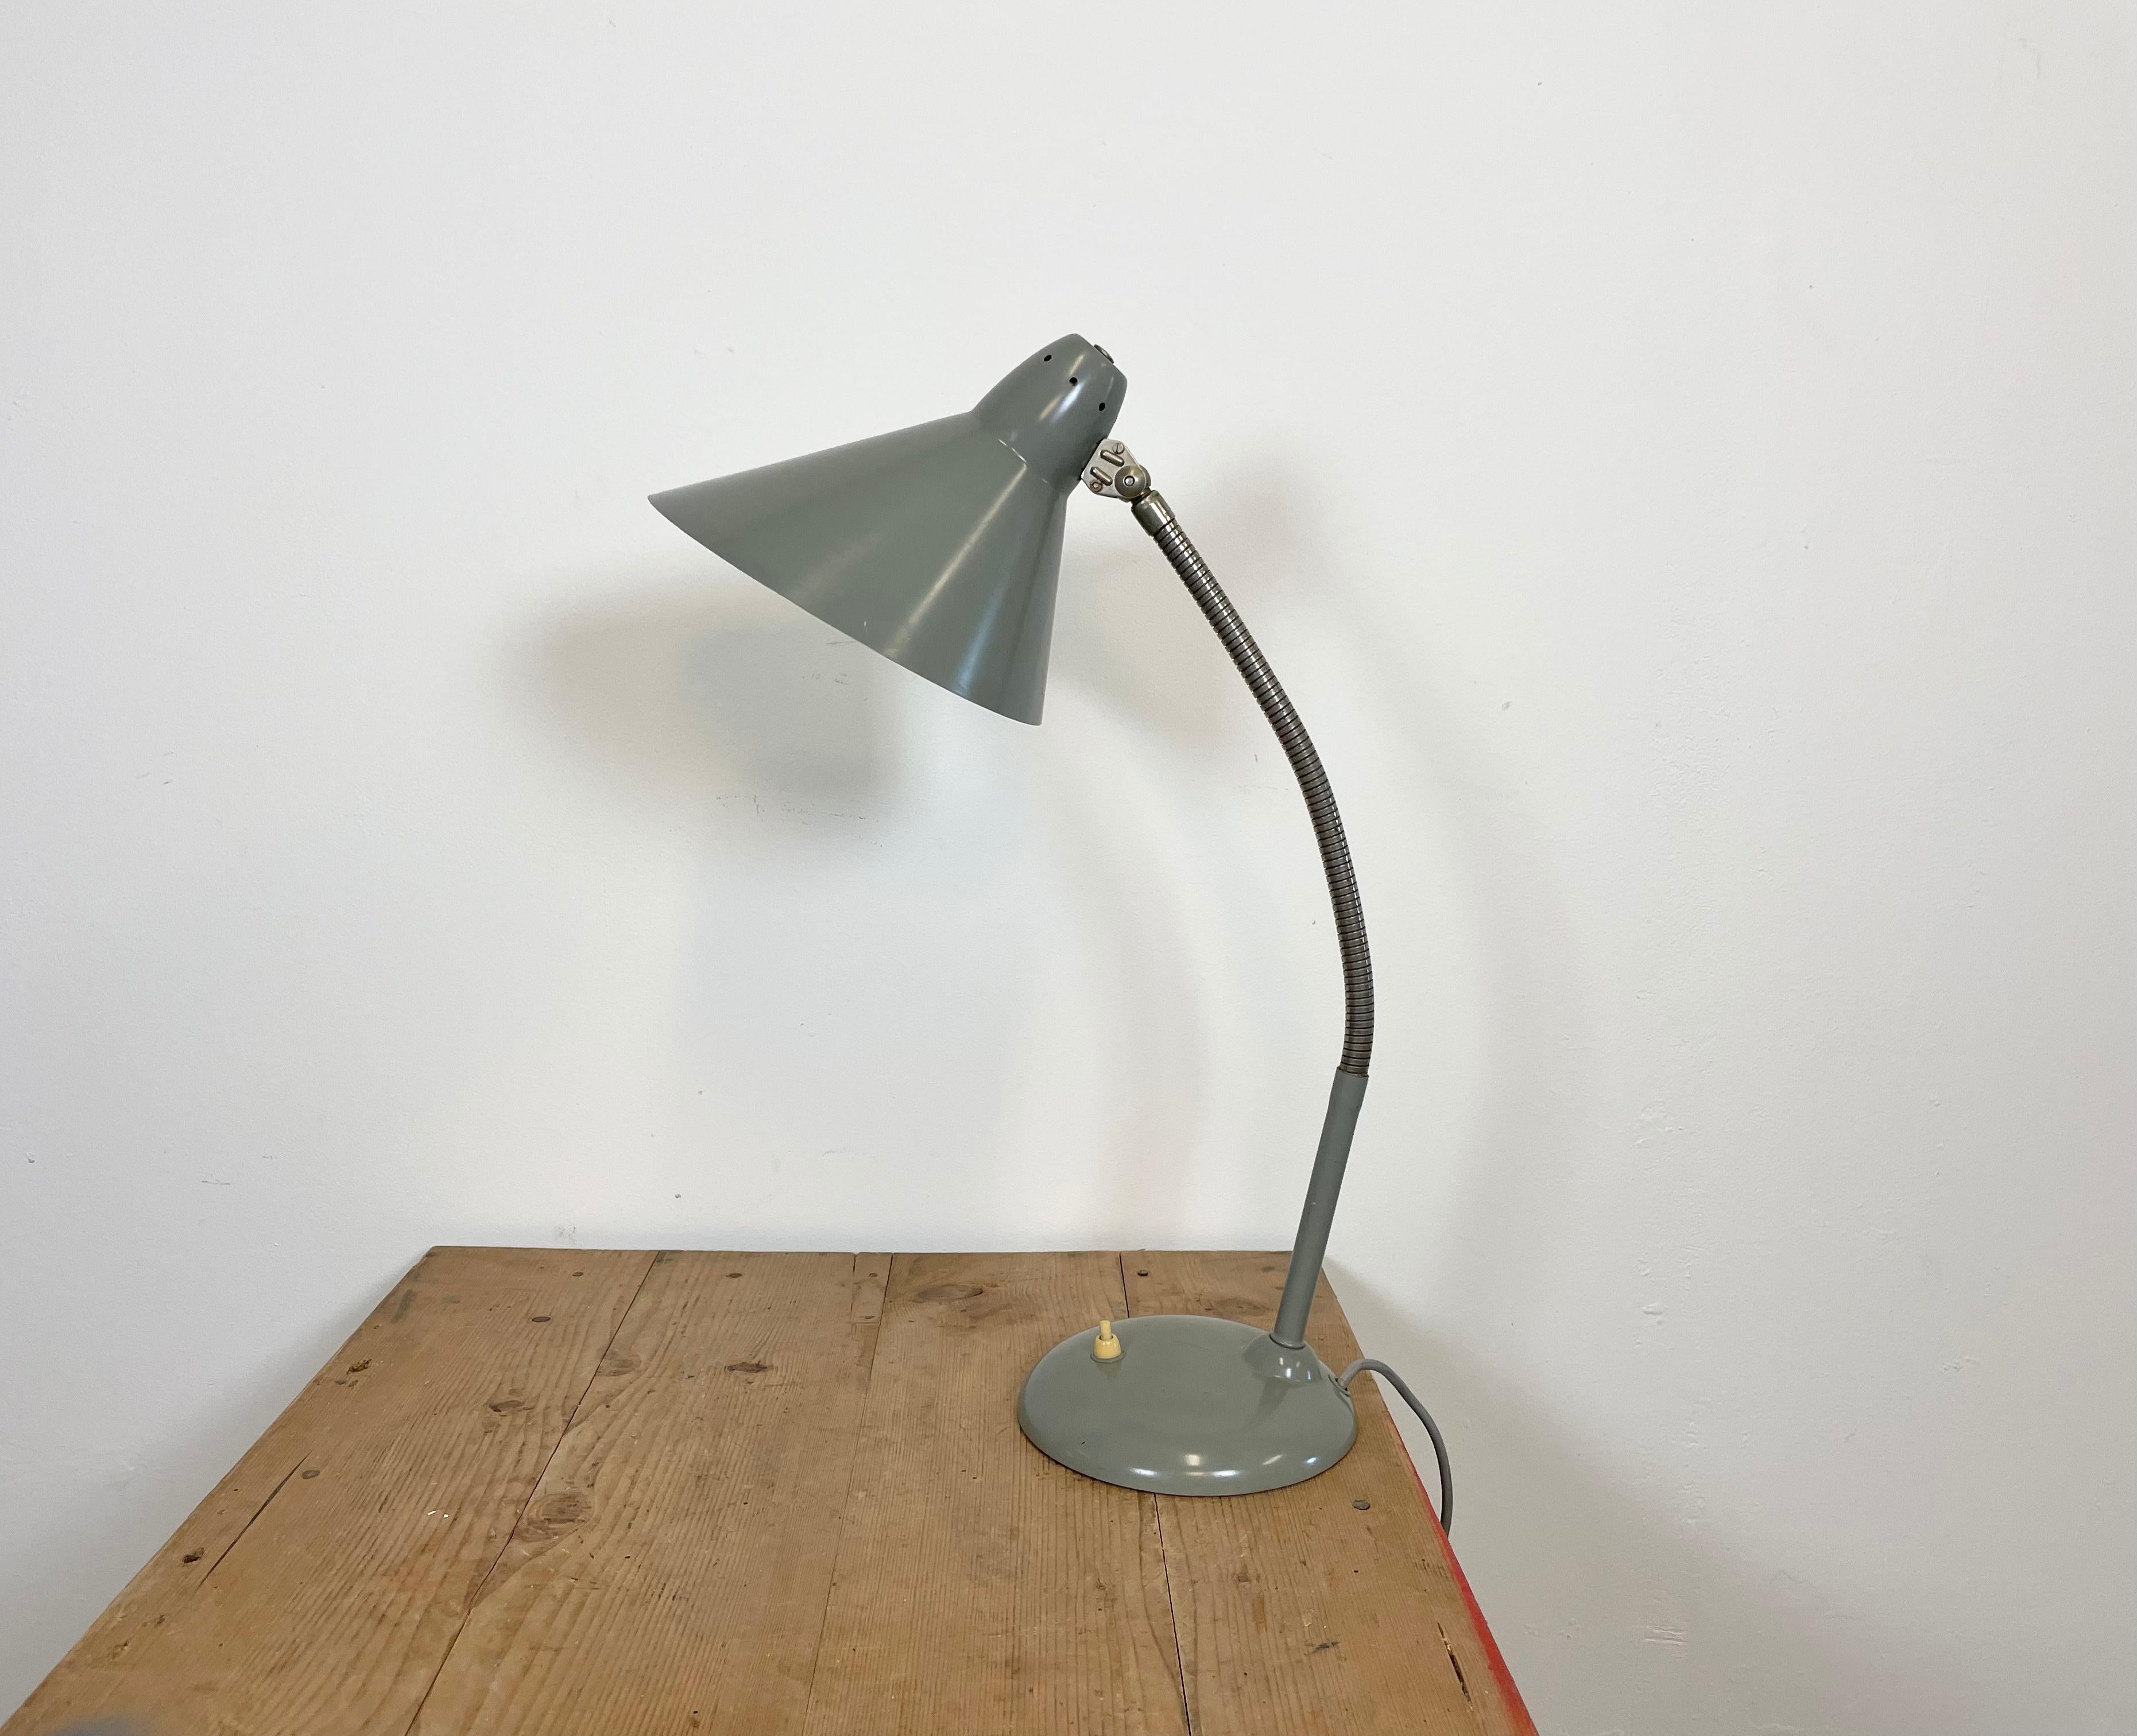 This desk lamp from the 1960s was designed and manufactured by Hala Zeist in the Netherlands. It features a chrome-plated flexible arm, a grey metal base and shade.
The socket requires E 27 light bulbs. The lampshade diameter is 23 cm. Fully